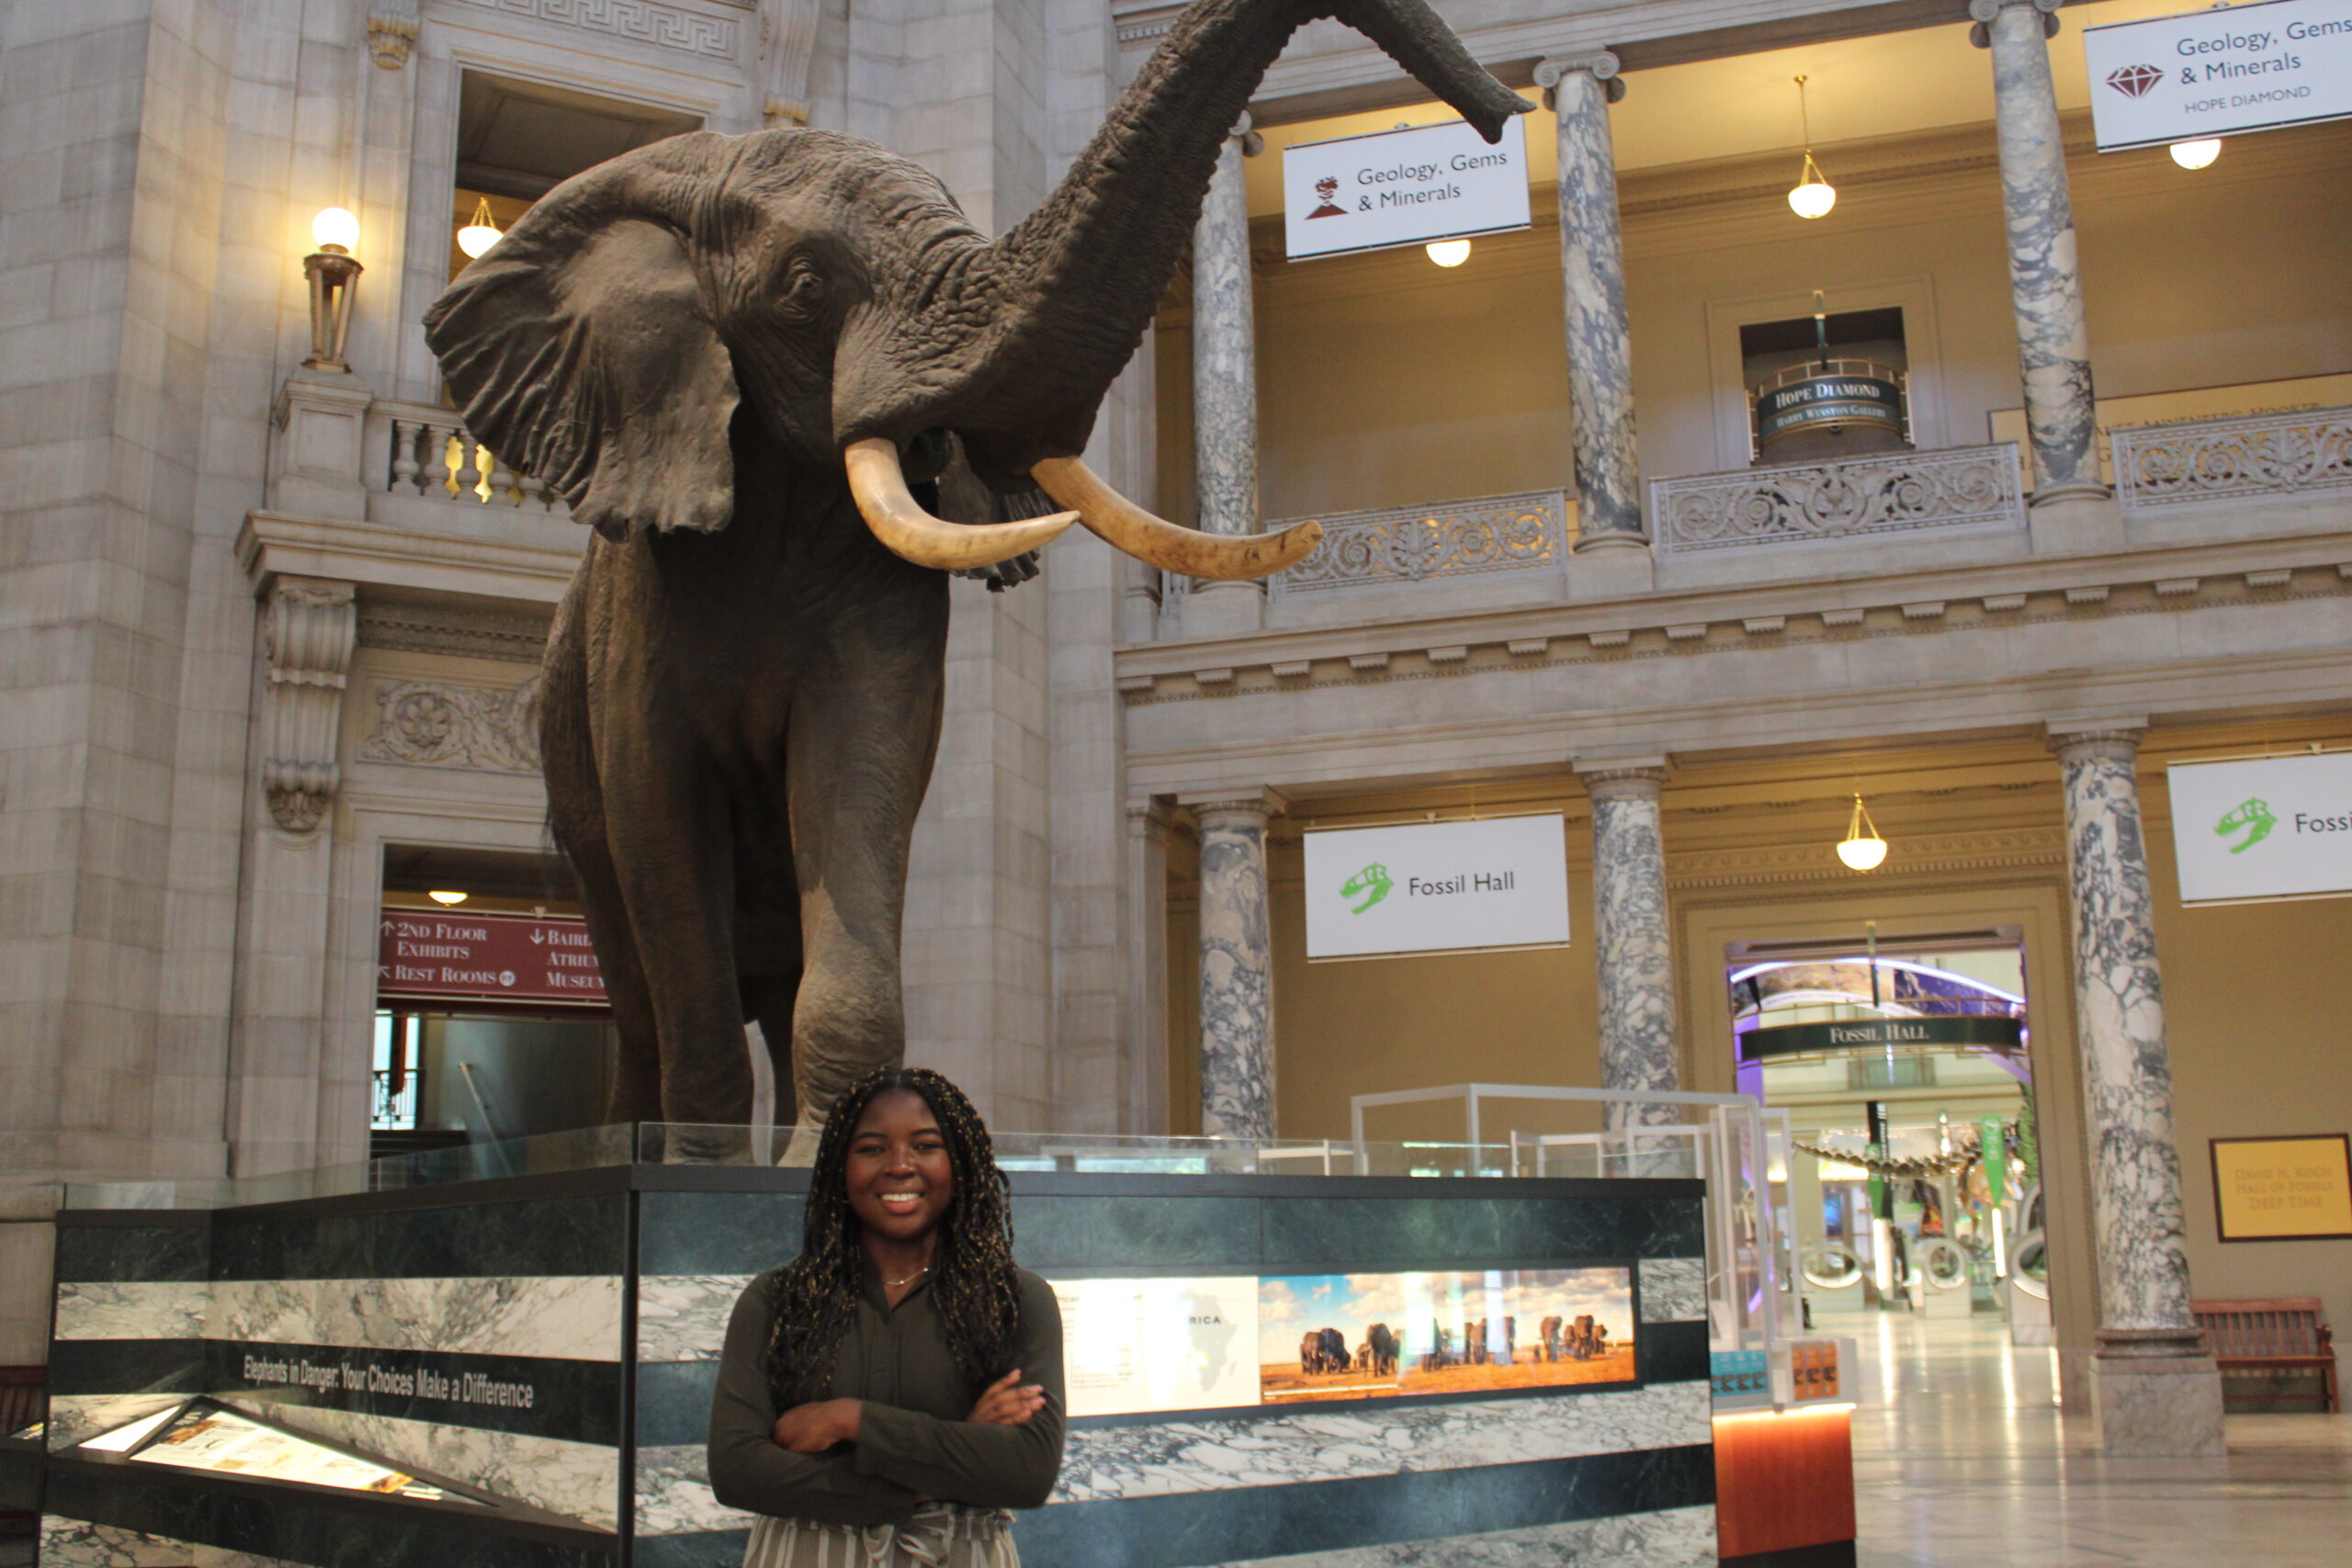 Daniella smiling with arms crossed in front of a large figure of Henry the elephant.